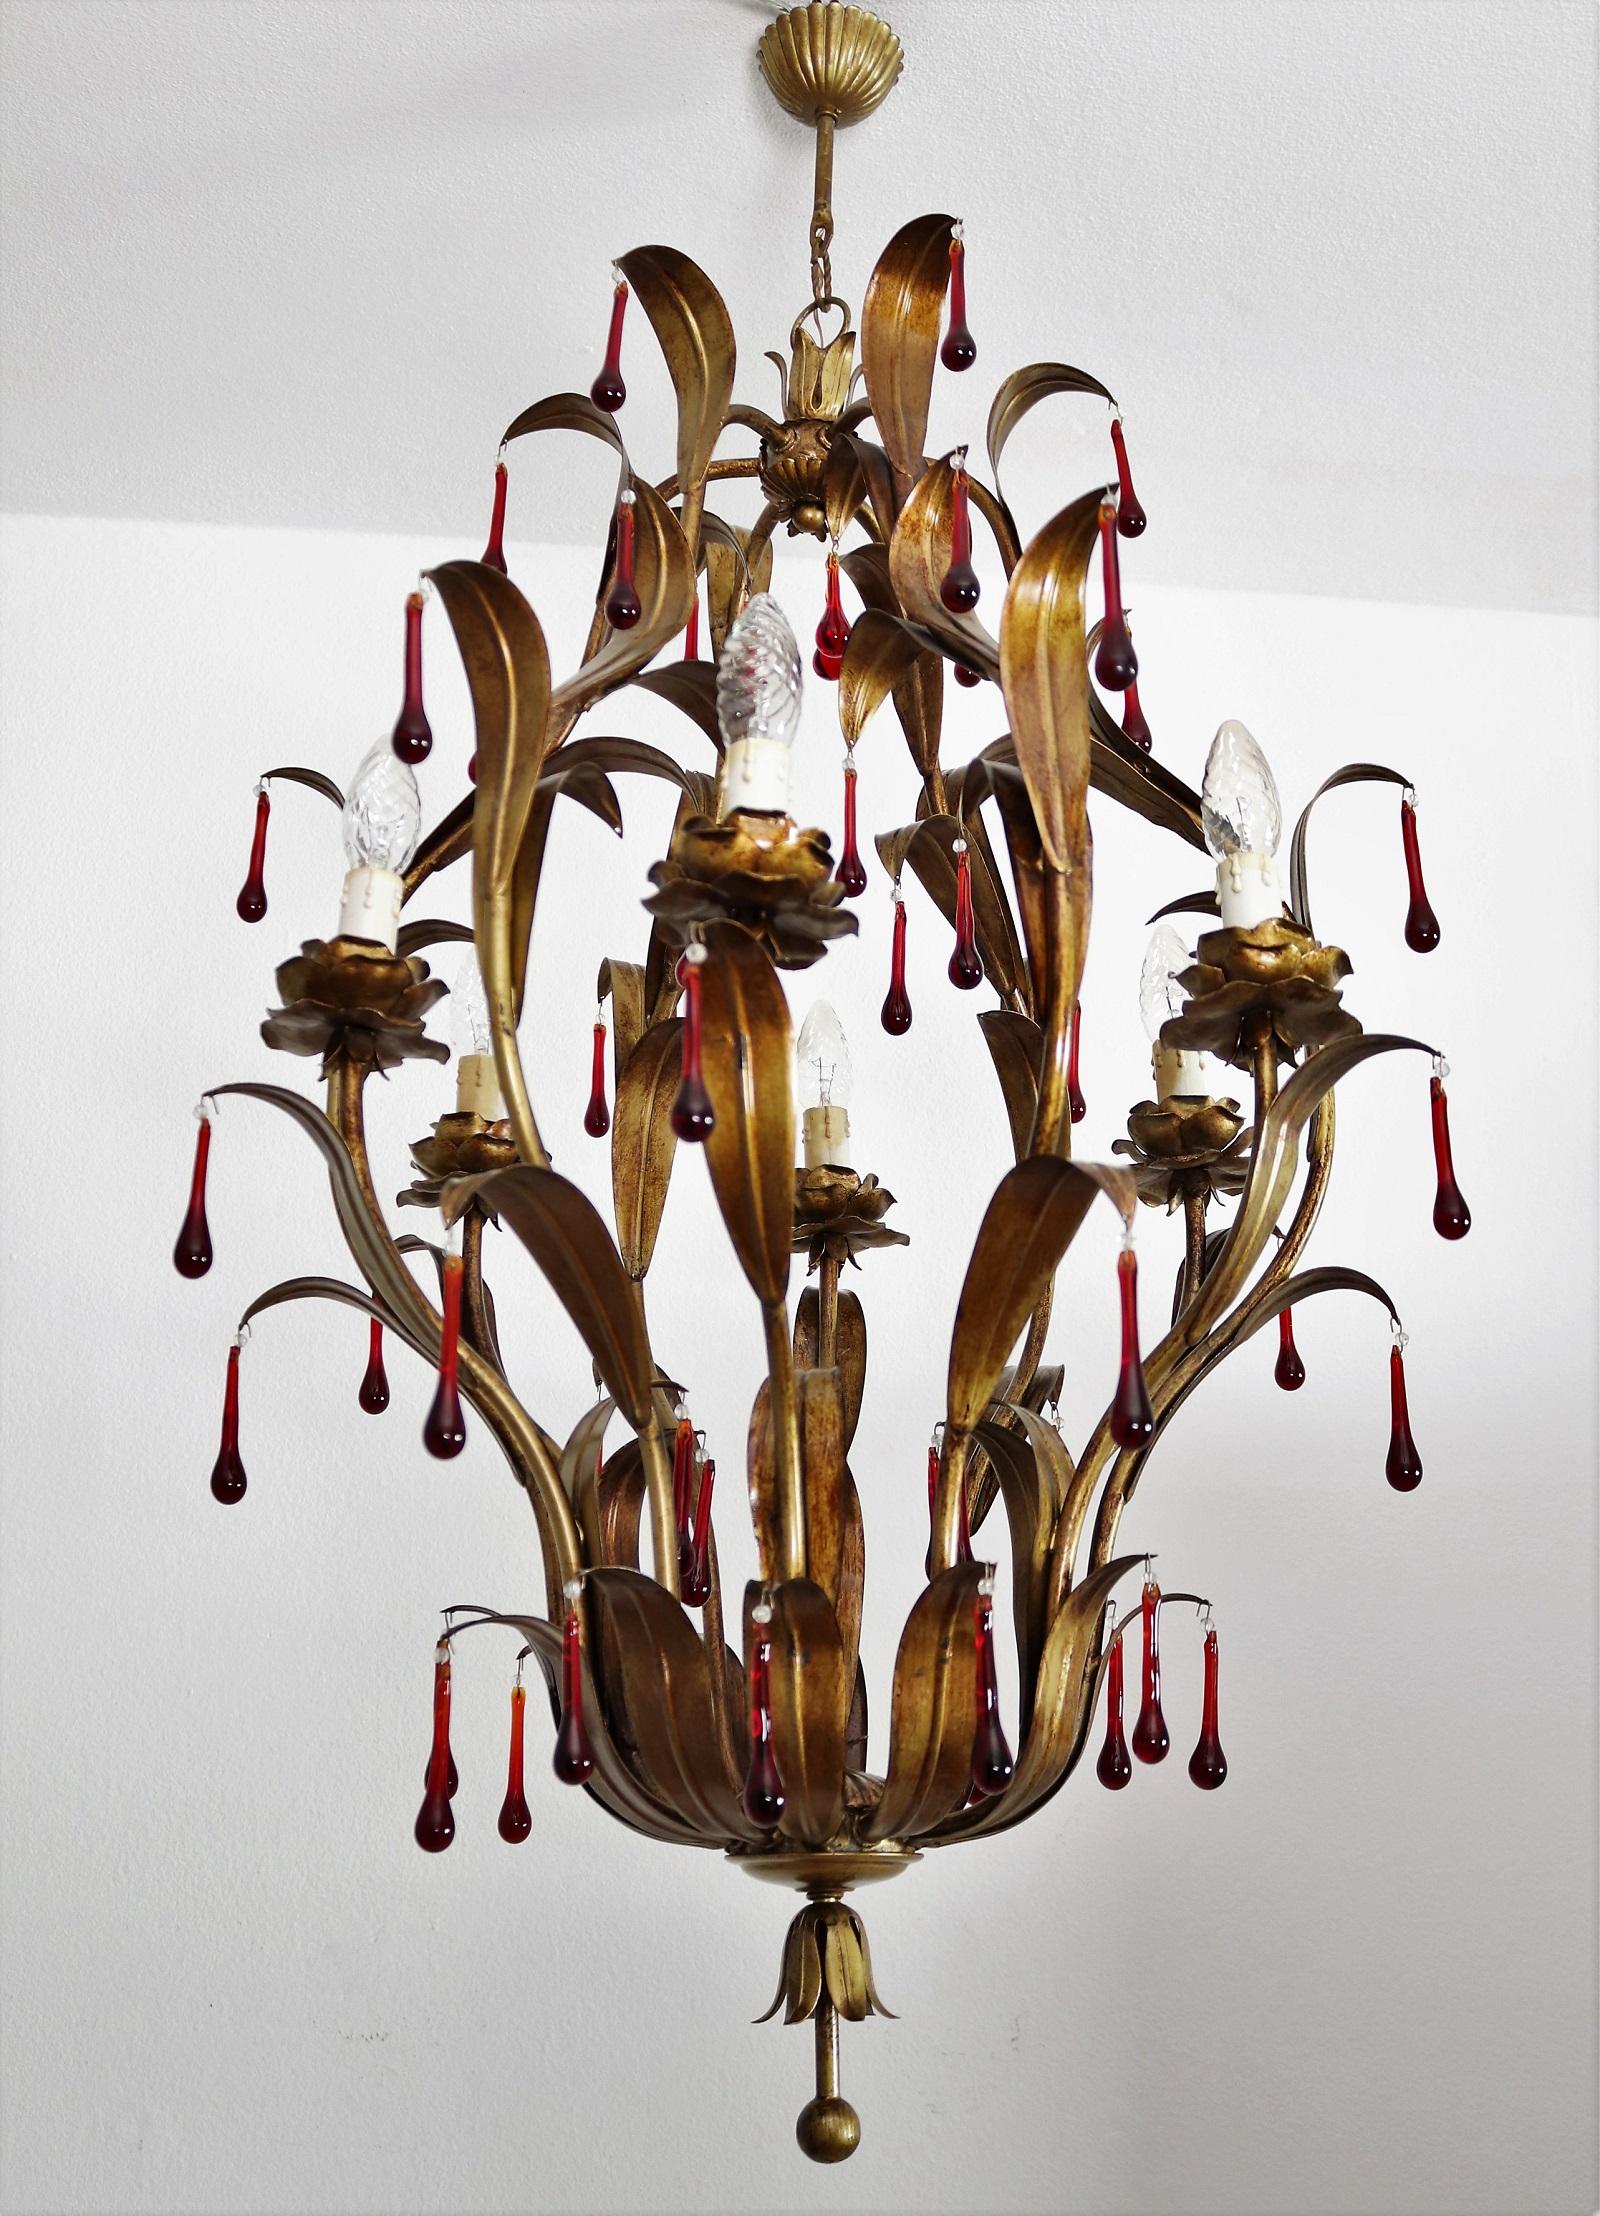 Beautiful Italian big chandelier made of gilt metal in the 1970s.
Attributed to Messes. Banci, Florence.
The chandelier is complete with 57 red Murano glass drops.
Nearly excellent condition, all drops complete and without defect.
Clean and